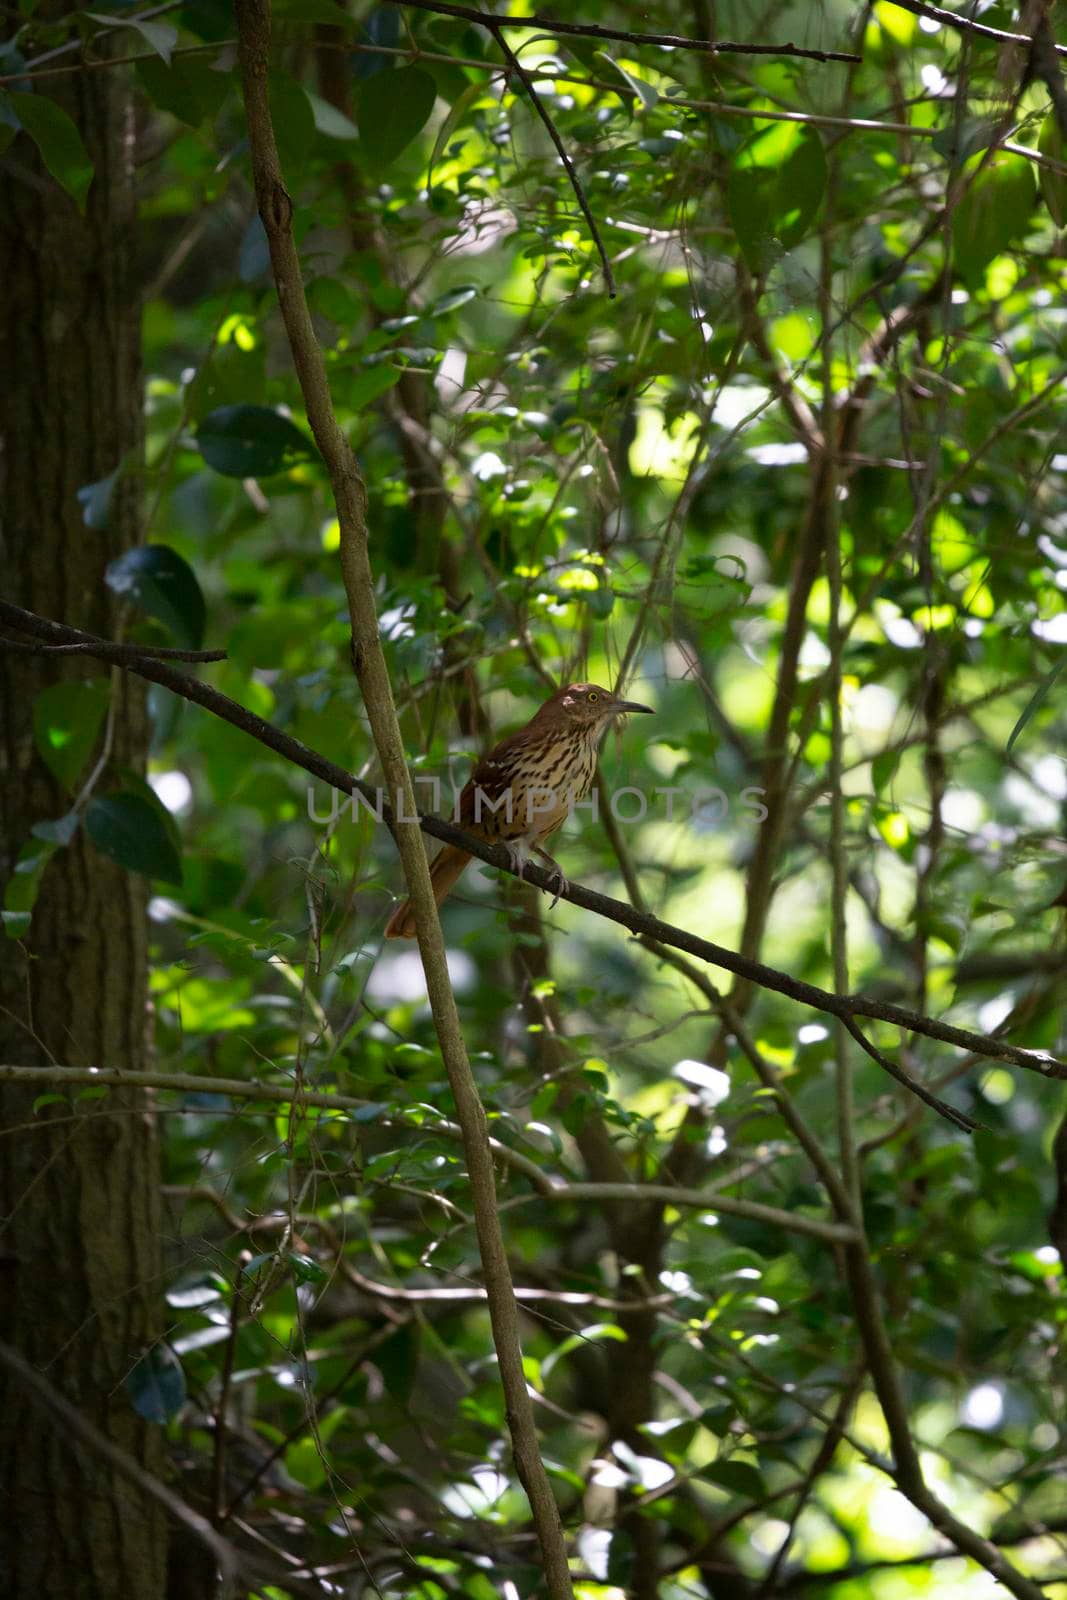 Curious brown thrasher (Toxostoma rufum) looking around from its perch on a limb